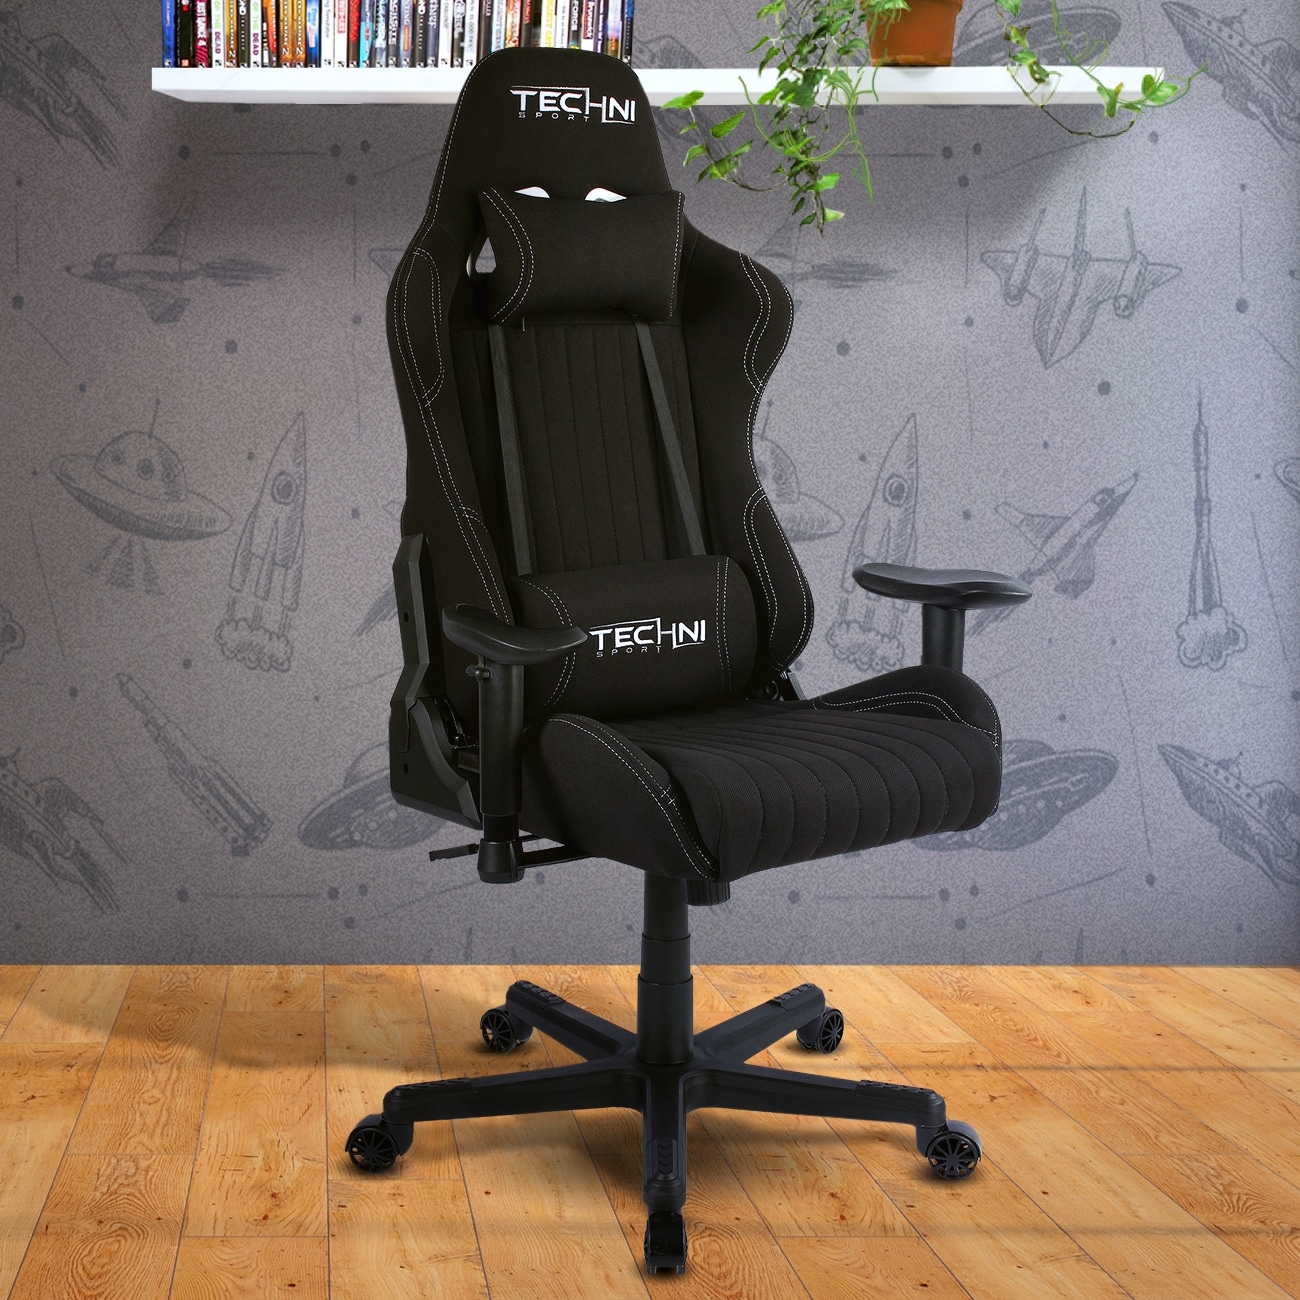 https://ak1.ostkcdn.com/images/products/is/images/direct/e74bffa9dcd7ad1cf2ab93df815482c8635a2398/Fabric-Ergonomic-Chair-High-Back-Gaming-Chair-with-Removable-Headrest-Pillow-and-Lumbar-Cushion-with-Non-marking-Casters.jpg